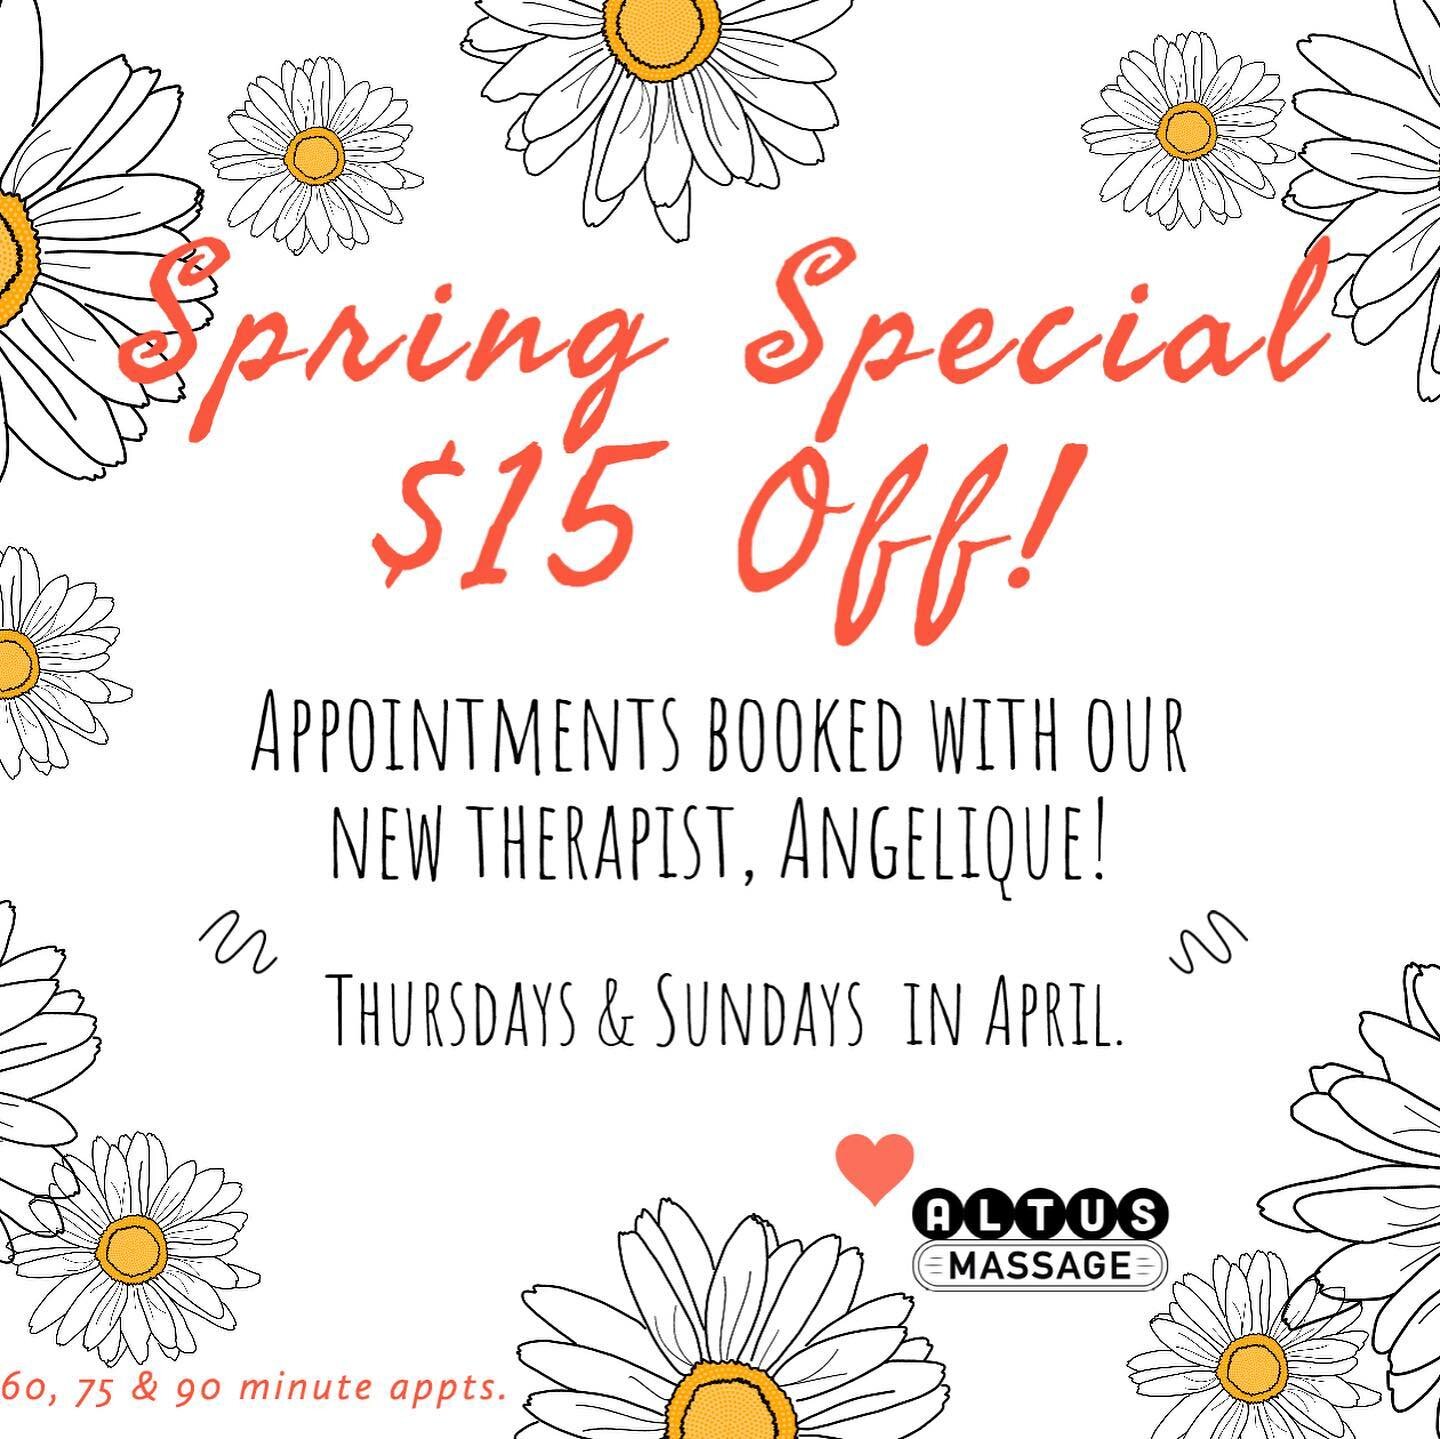 Happy Spring! (Despite the chilly morning)
We&rsquo;re thrilled to introduce you to our new therapist, Angelique! And invite you to enjoy $15 off appts booked with her through April. Come help me welcome her to Altus!

Angelique is lovely 💖 She such